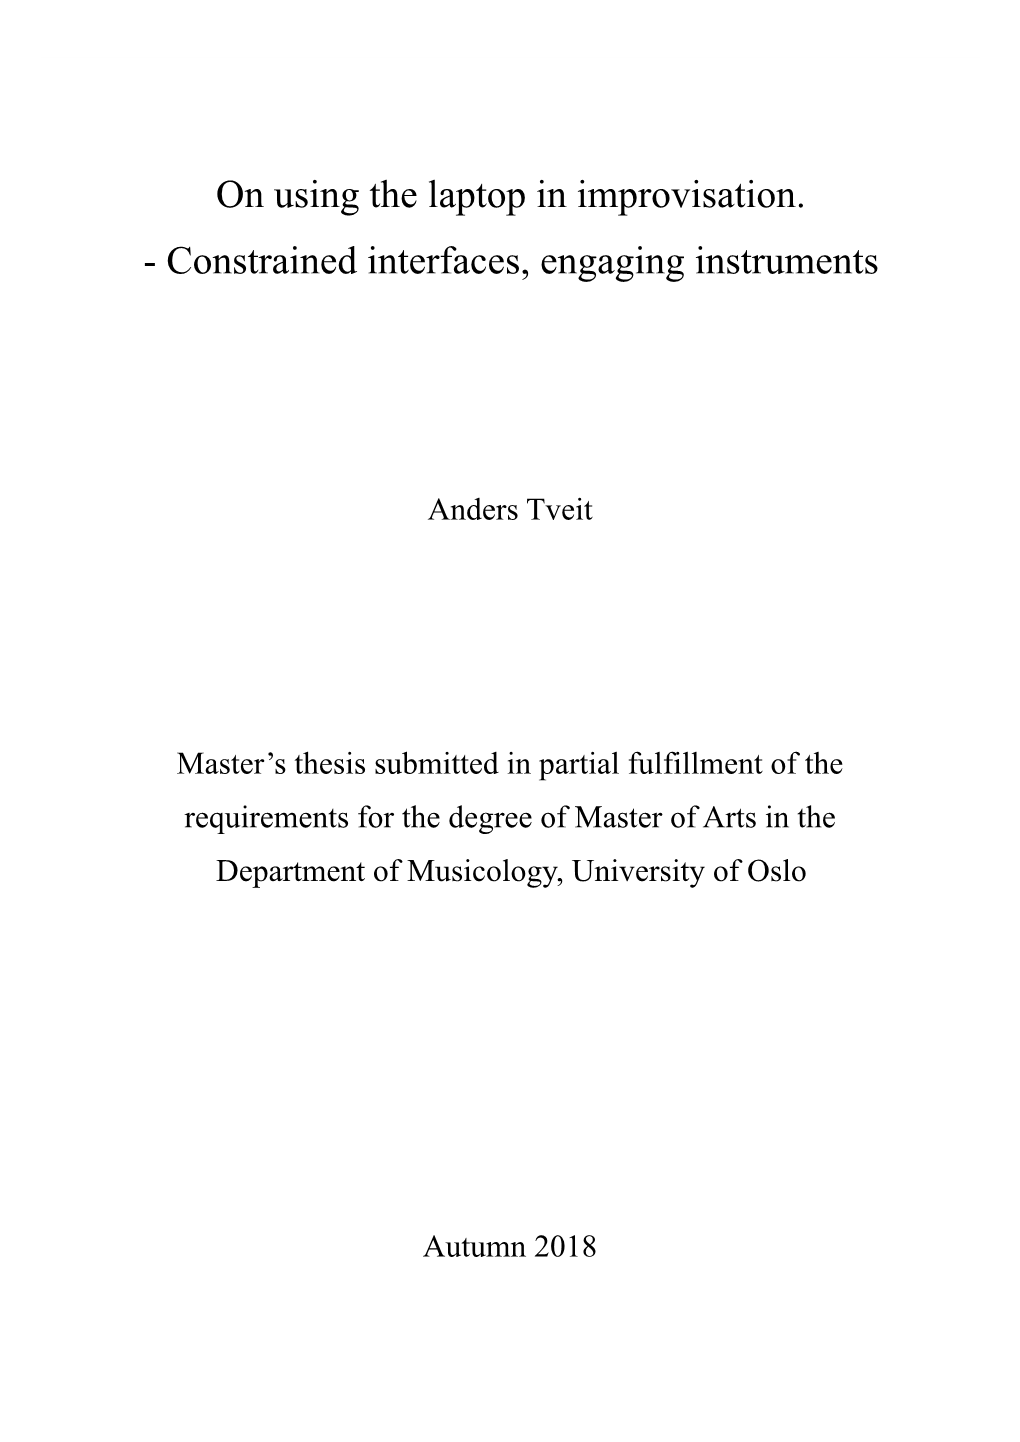 On Using the Laptop in Improvisation. - Constrained Interfaces, Engaging Instruments